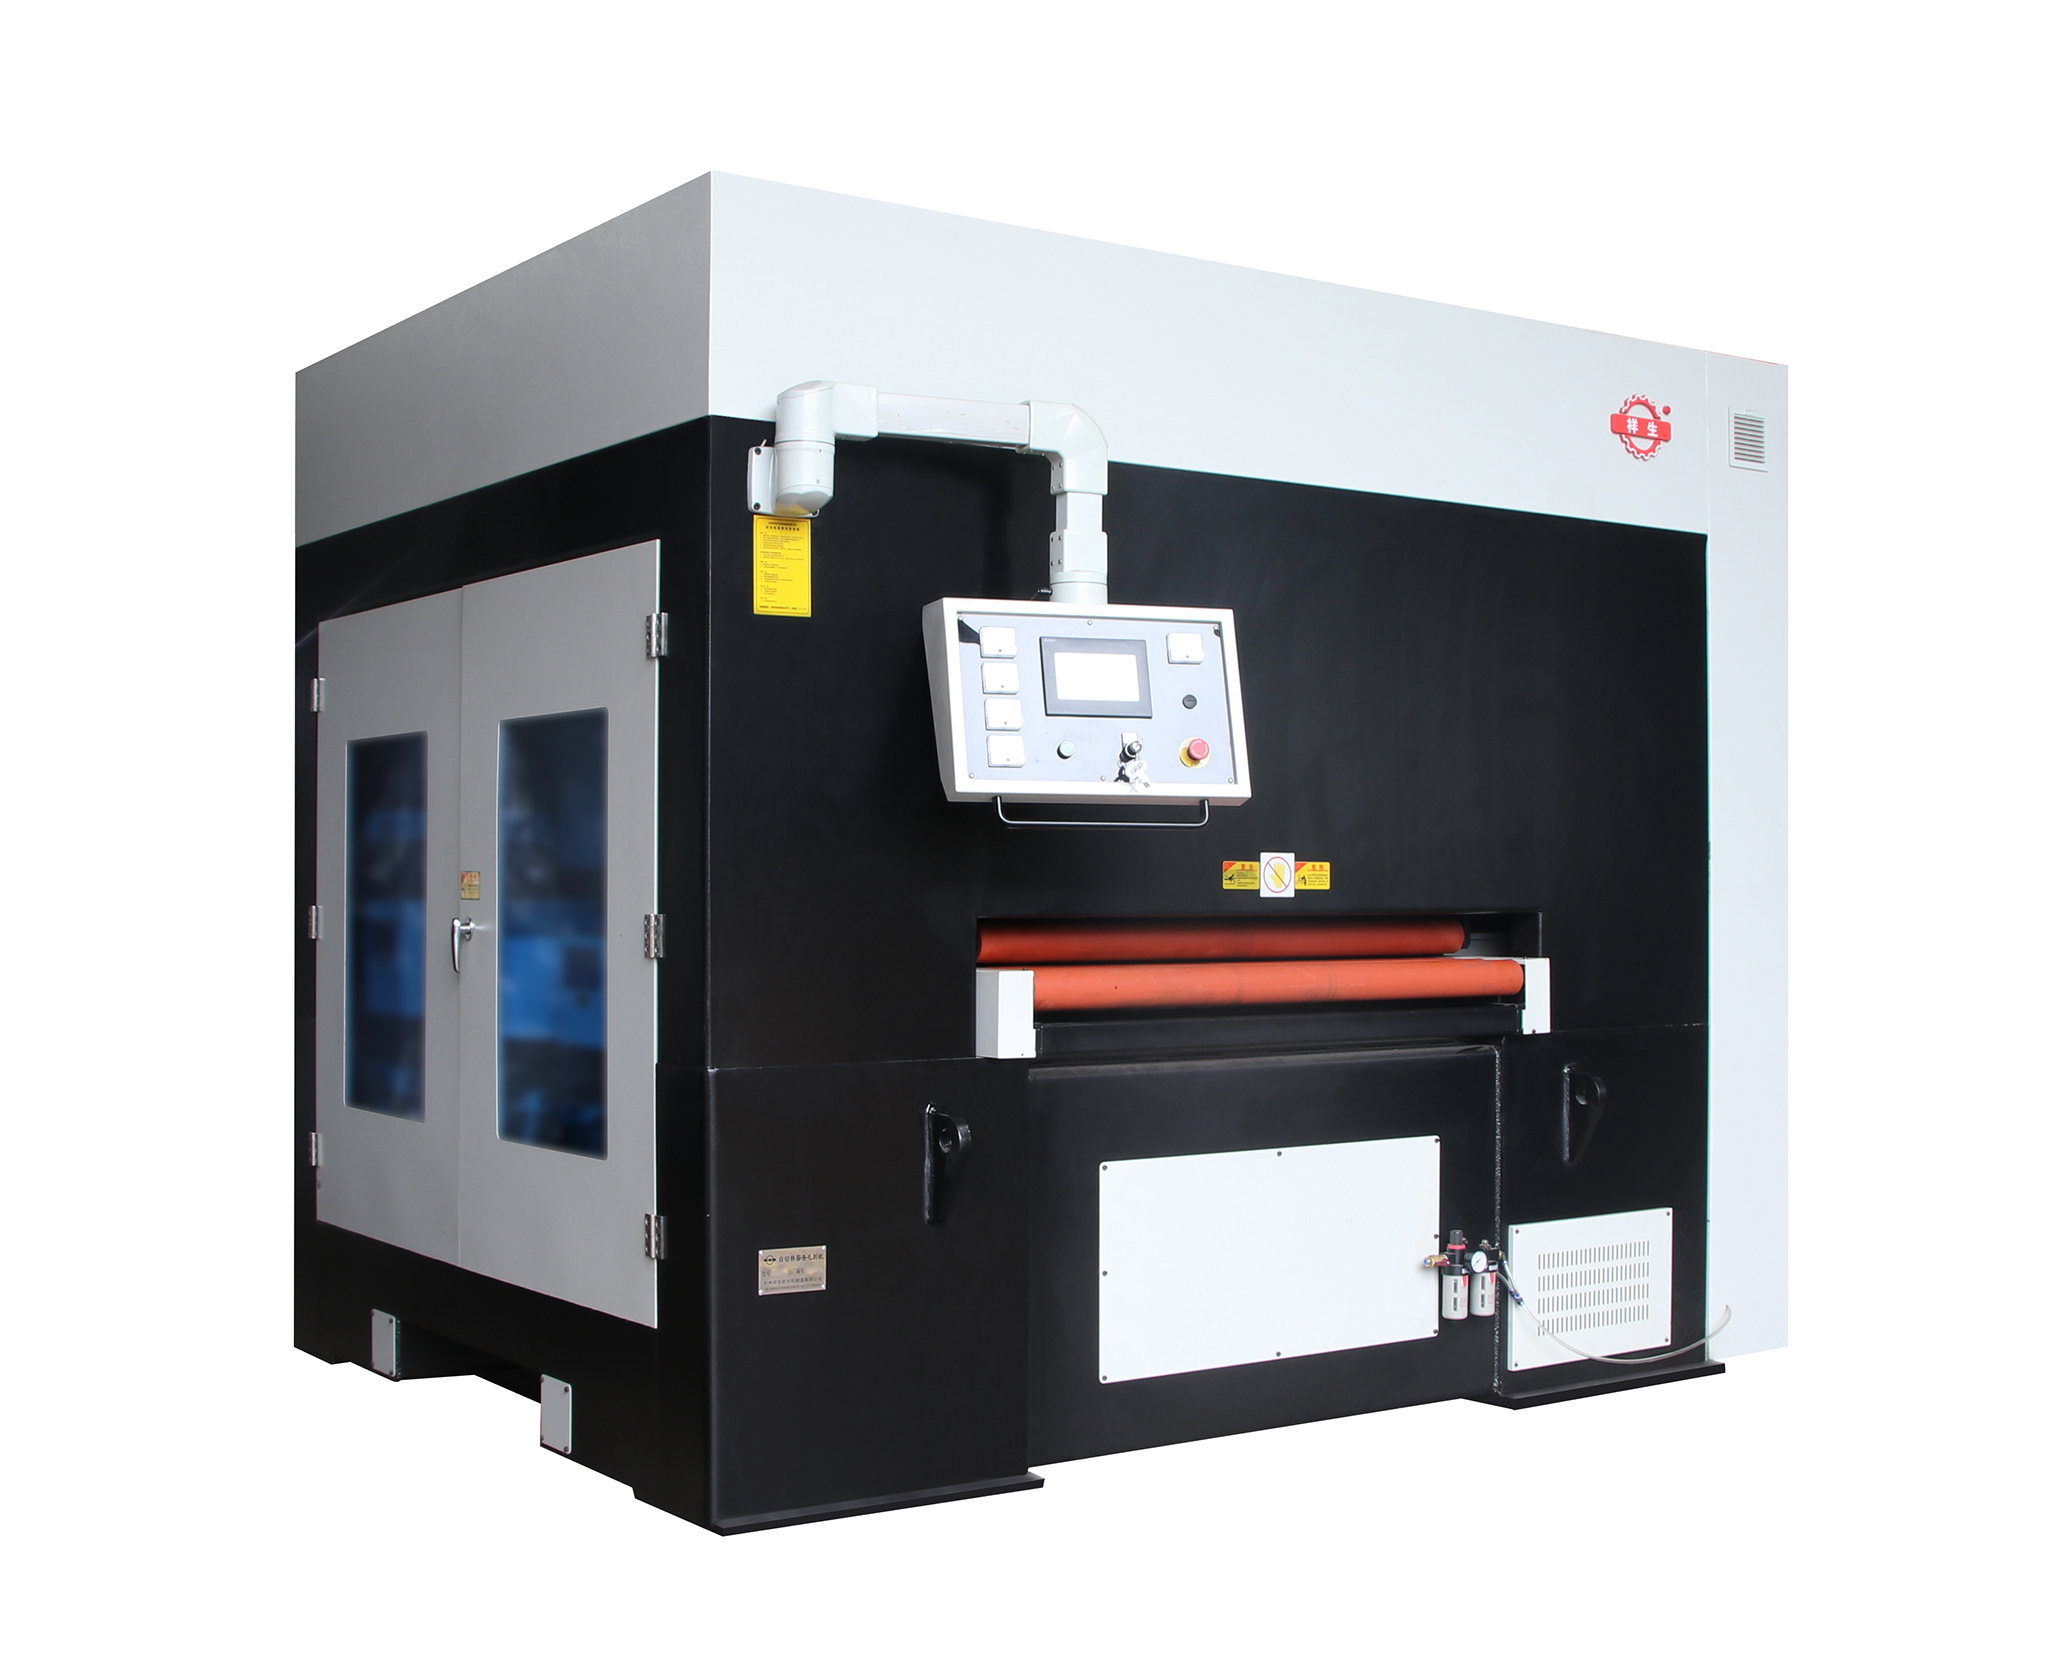 Excellent deslagging and edge rouding machine for plasma-oxy-fuel-cutting etc SG1300-3TB+B